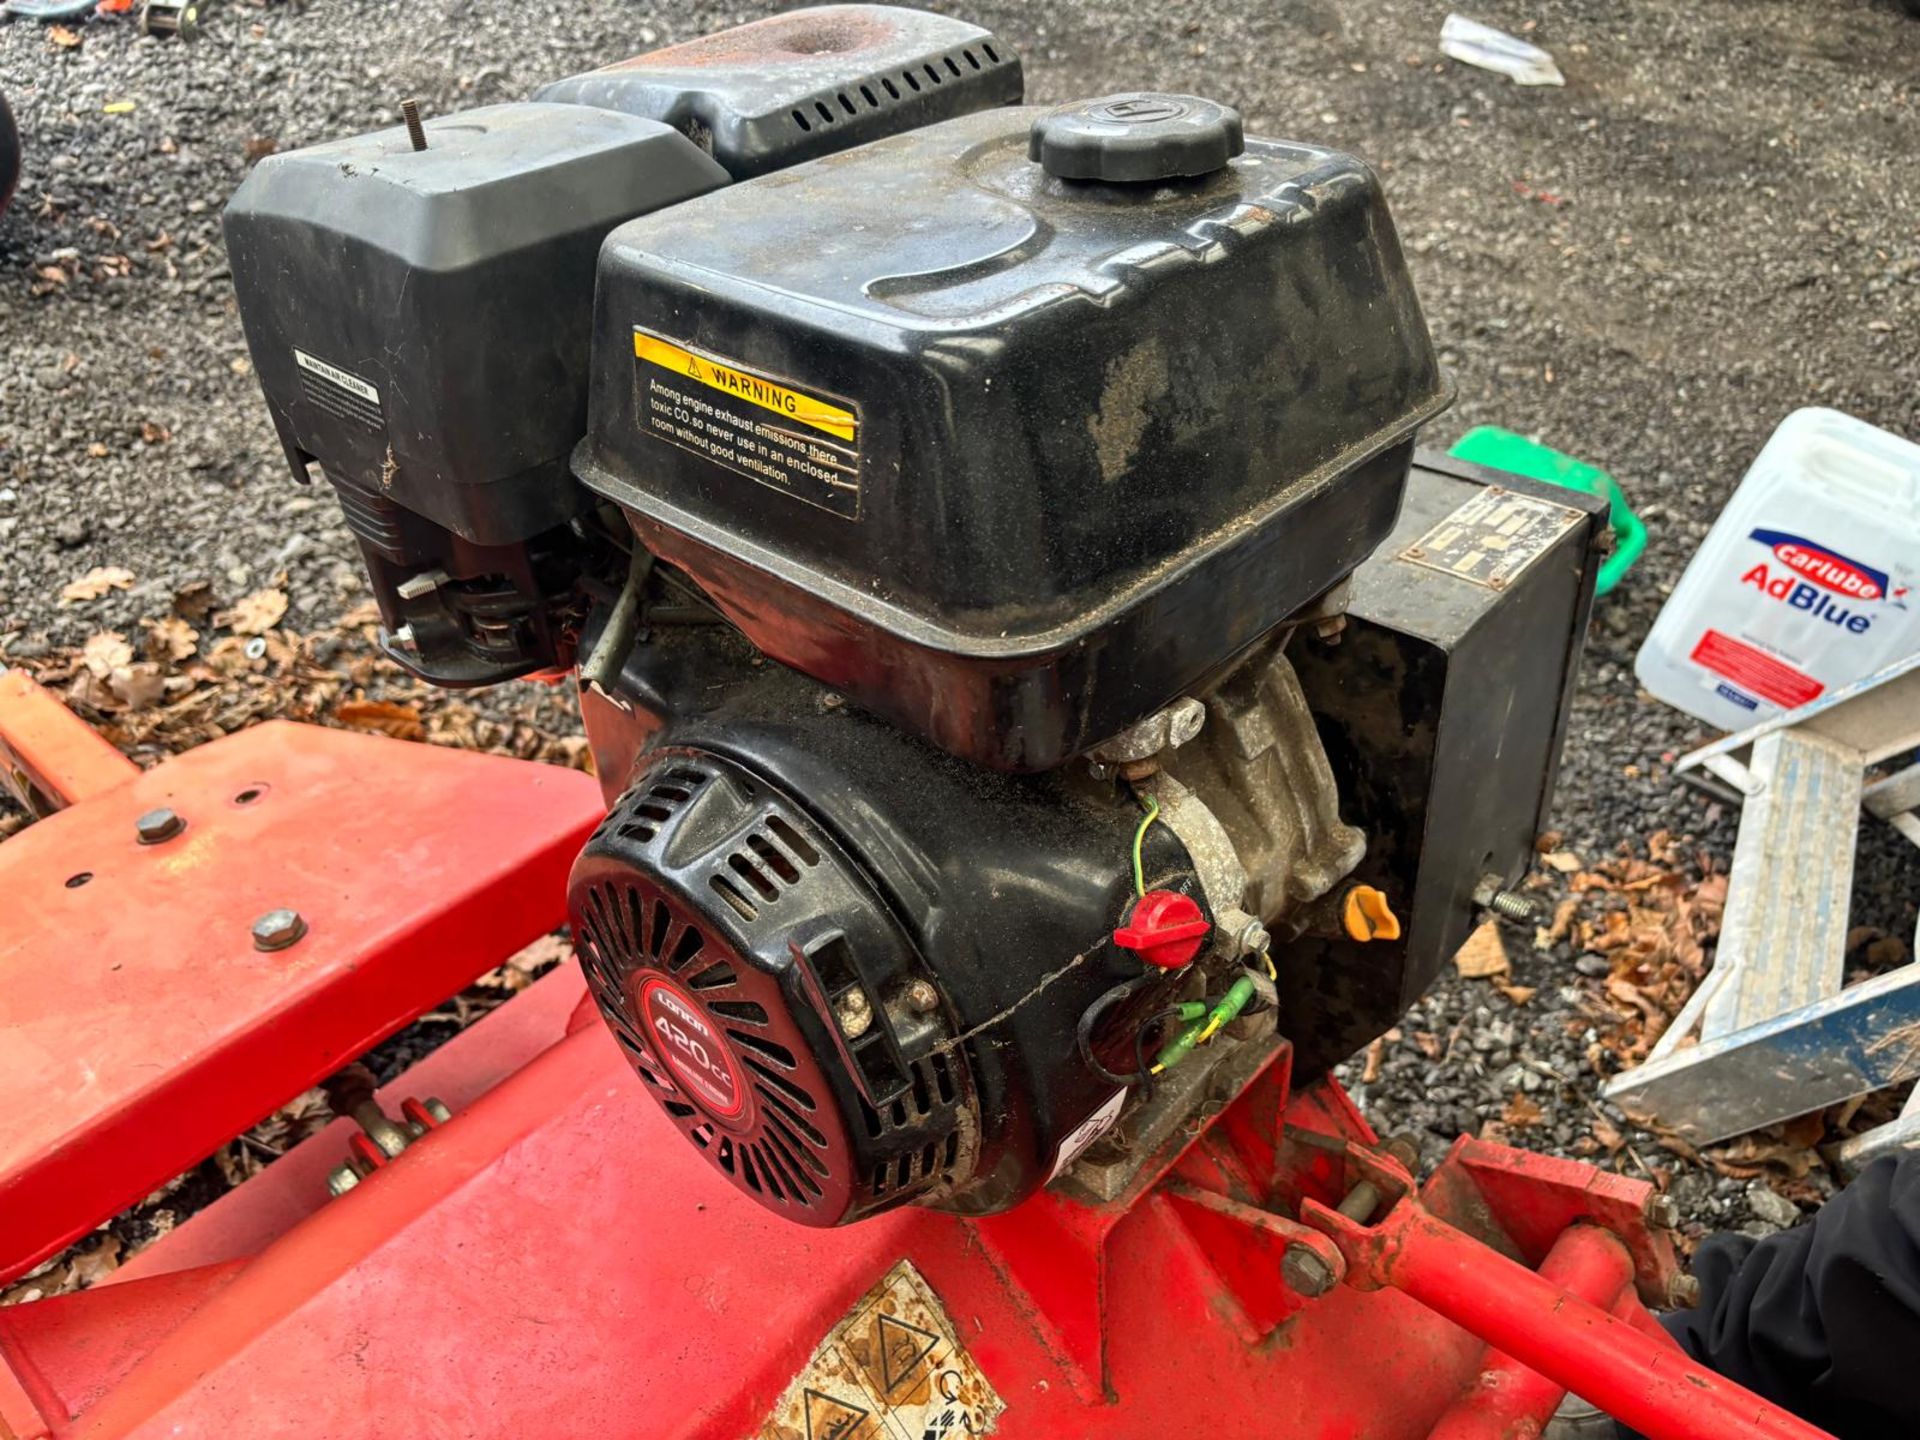 HIGH-PERFORMANCE ATV QUAD BIKE FLAIL MOWER: 4.5FT WIDE, 420CC ENGINE - EXCELLENT CONDITION! - Image 5 of 7